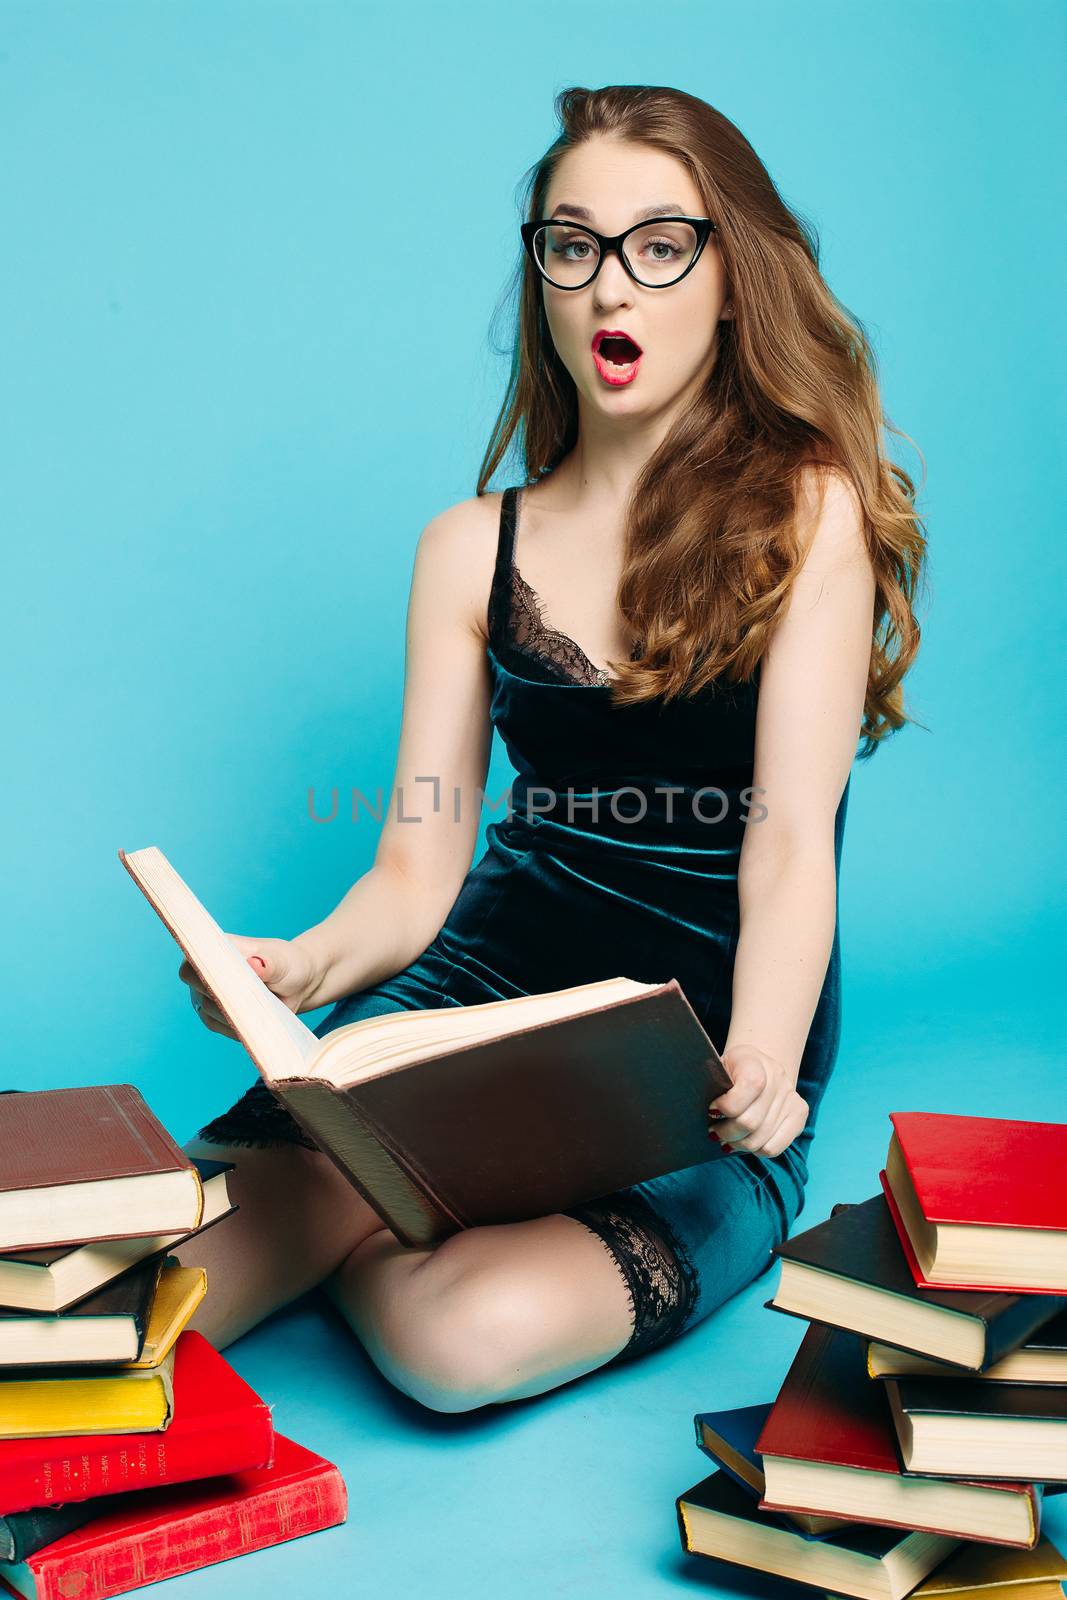 Sexy teacher among books holding heels and making duck face. by StudioLucky